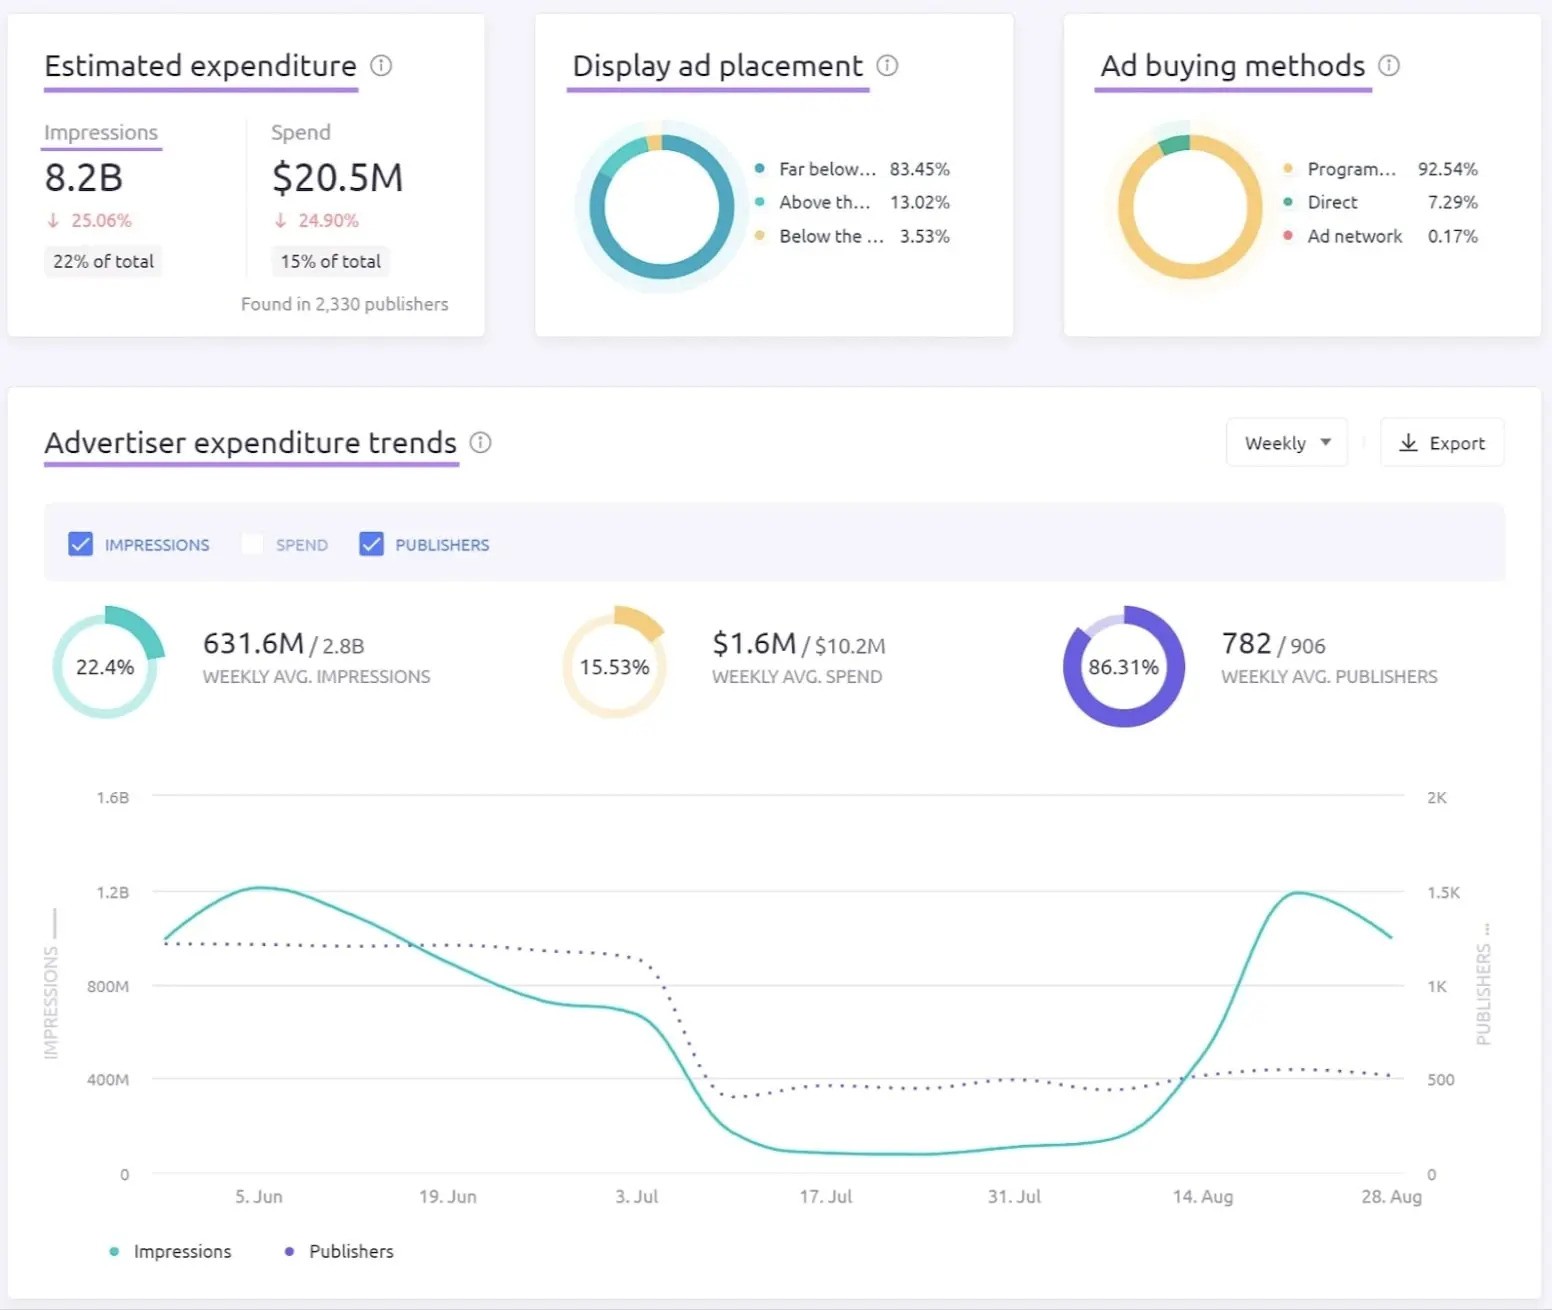 AdClarity app's overview report showing metrics such as estimated expenditure, ad placement, ad buying methods, and more